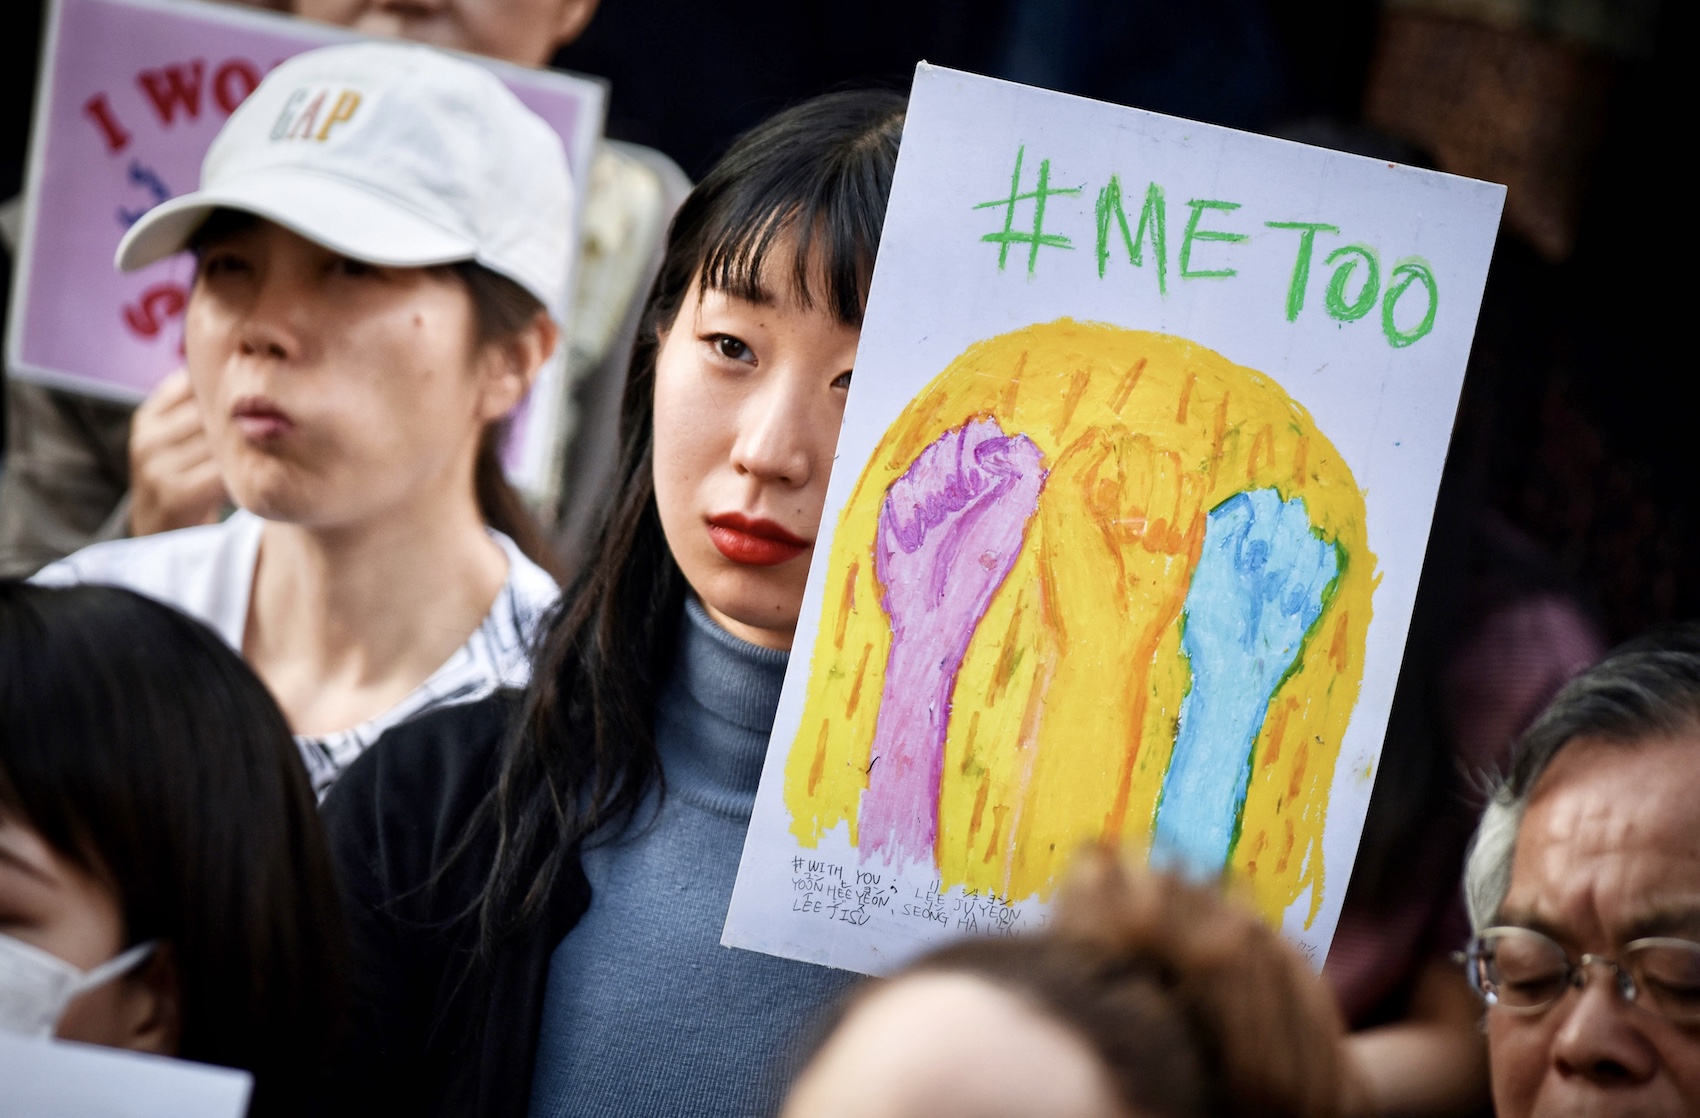 A demonstrator holds a sign reading "#Me Too" during a rally against sexual harassment in Shinjuku, Tokyo